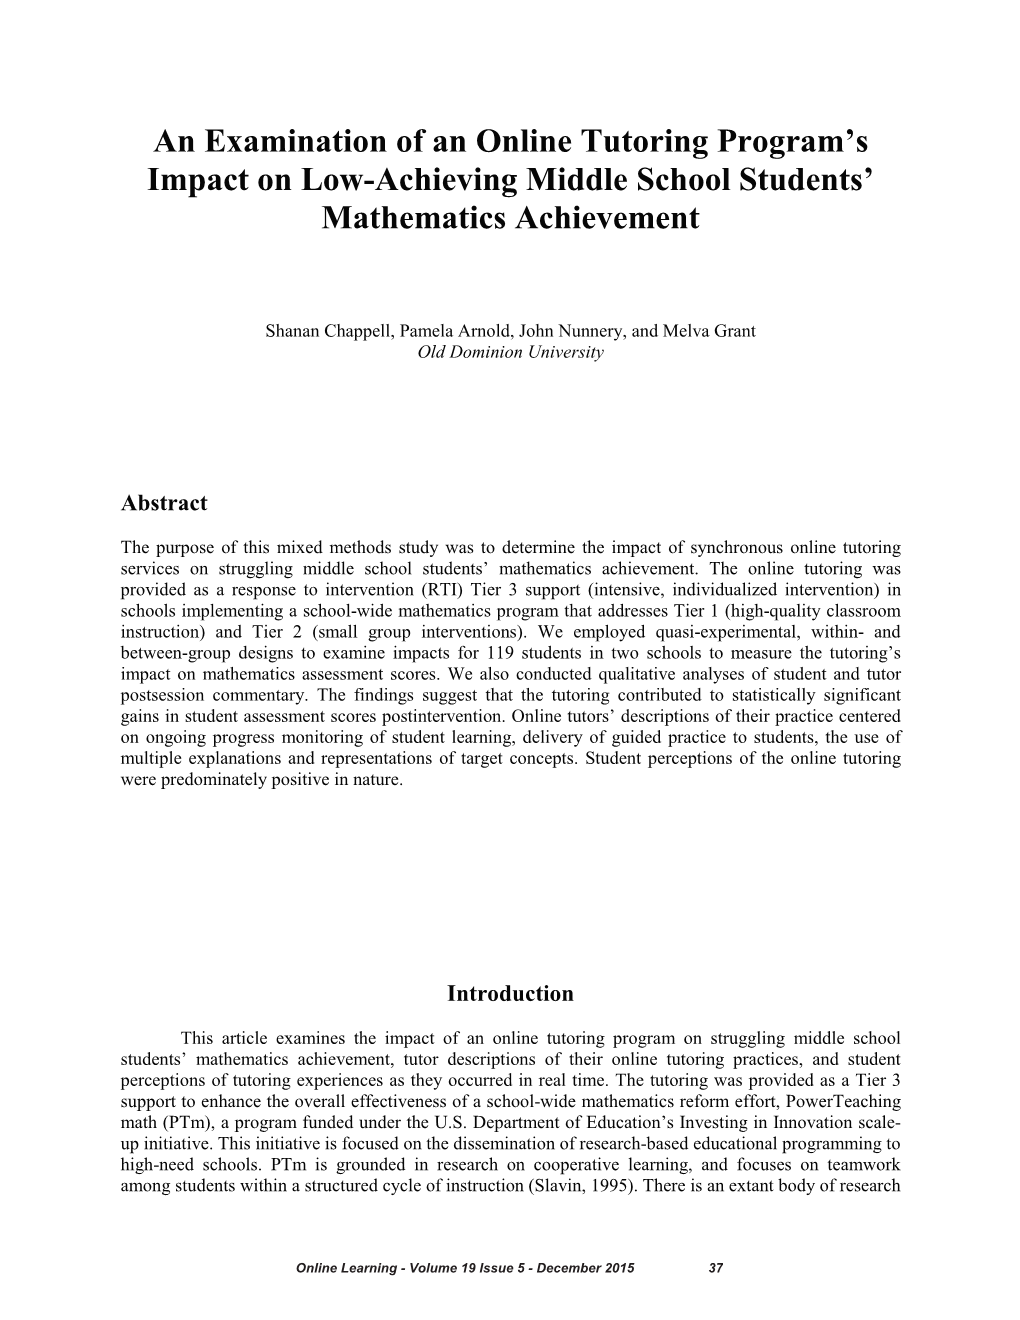 An Examination of an Online Tutoring Program's Impact on Low-Achieving Middle School Students' Mathematics Achievement